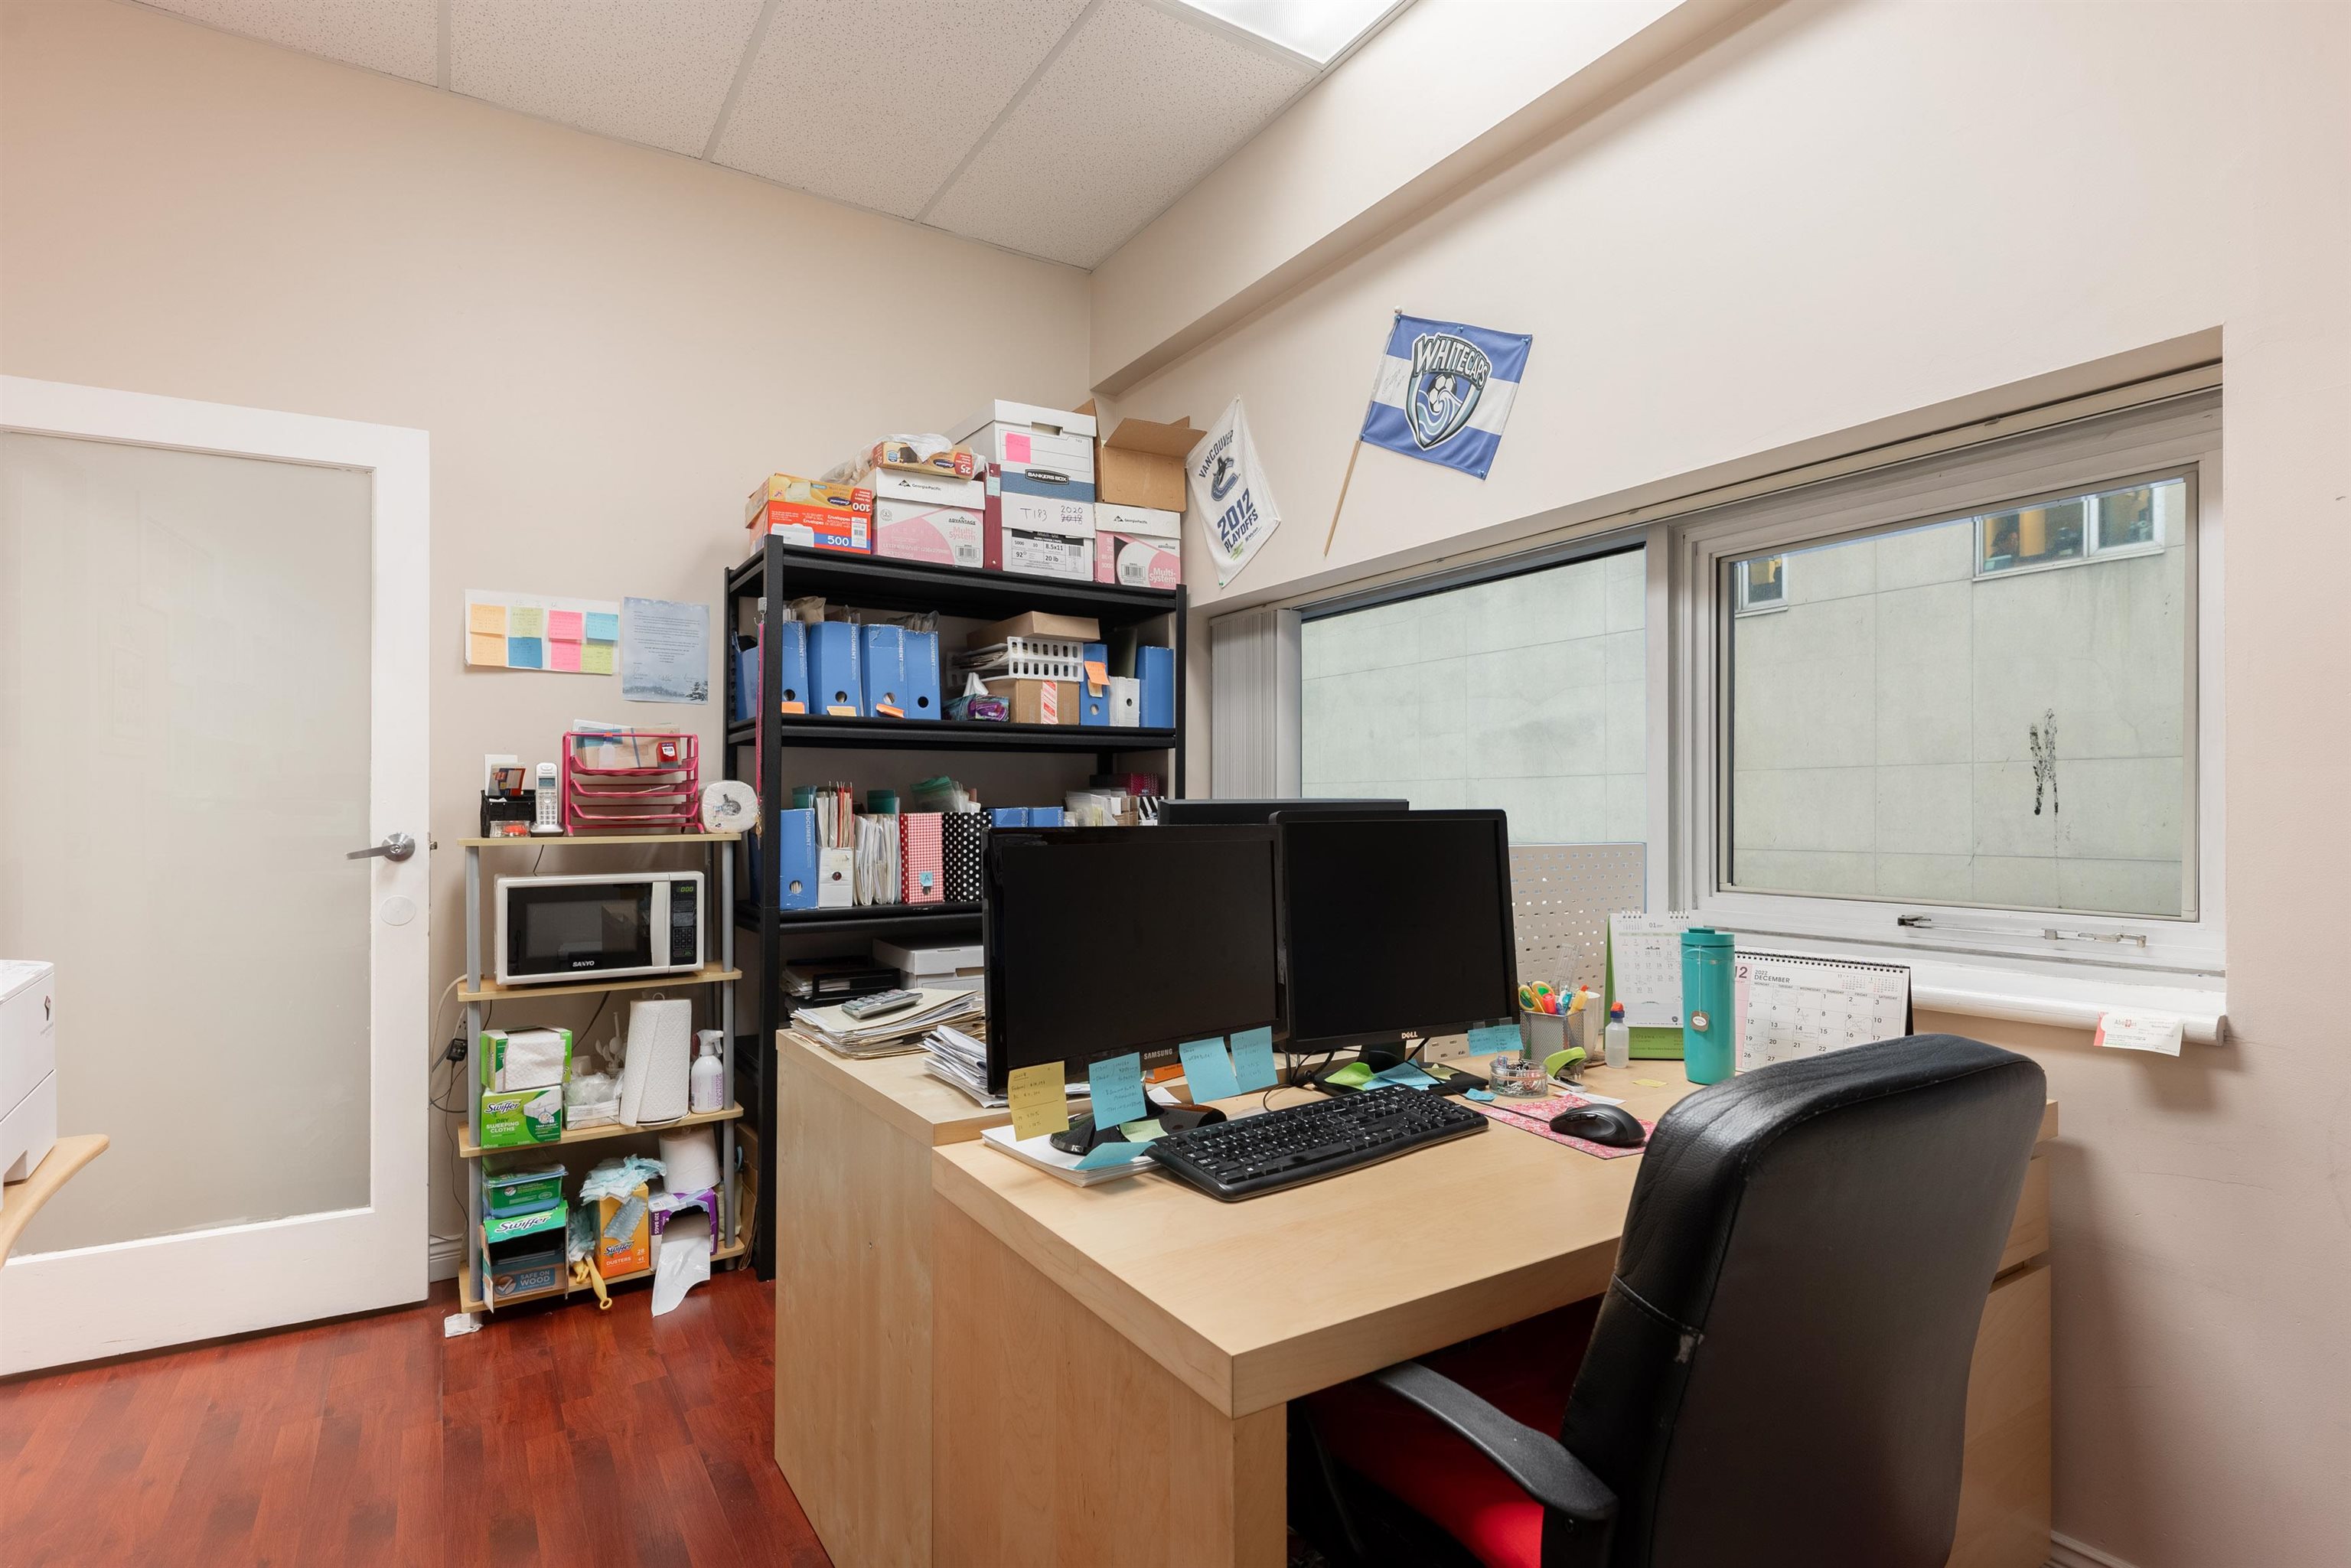 Michael Sung, 211-515 WPENDER STREET, Vancouver, British Columbia, Office,For Lease ,C8048933